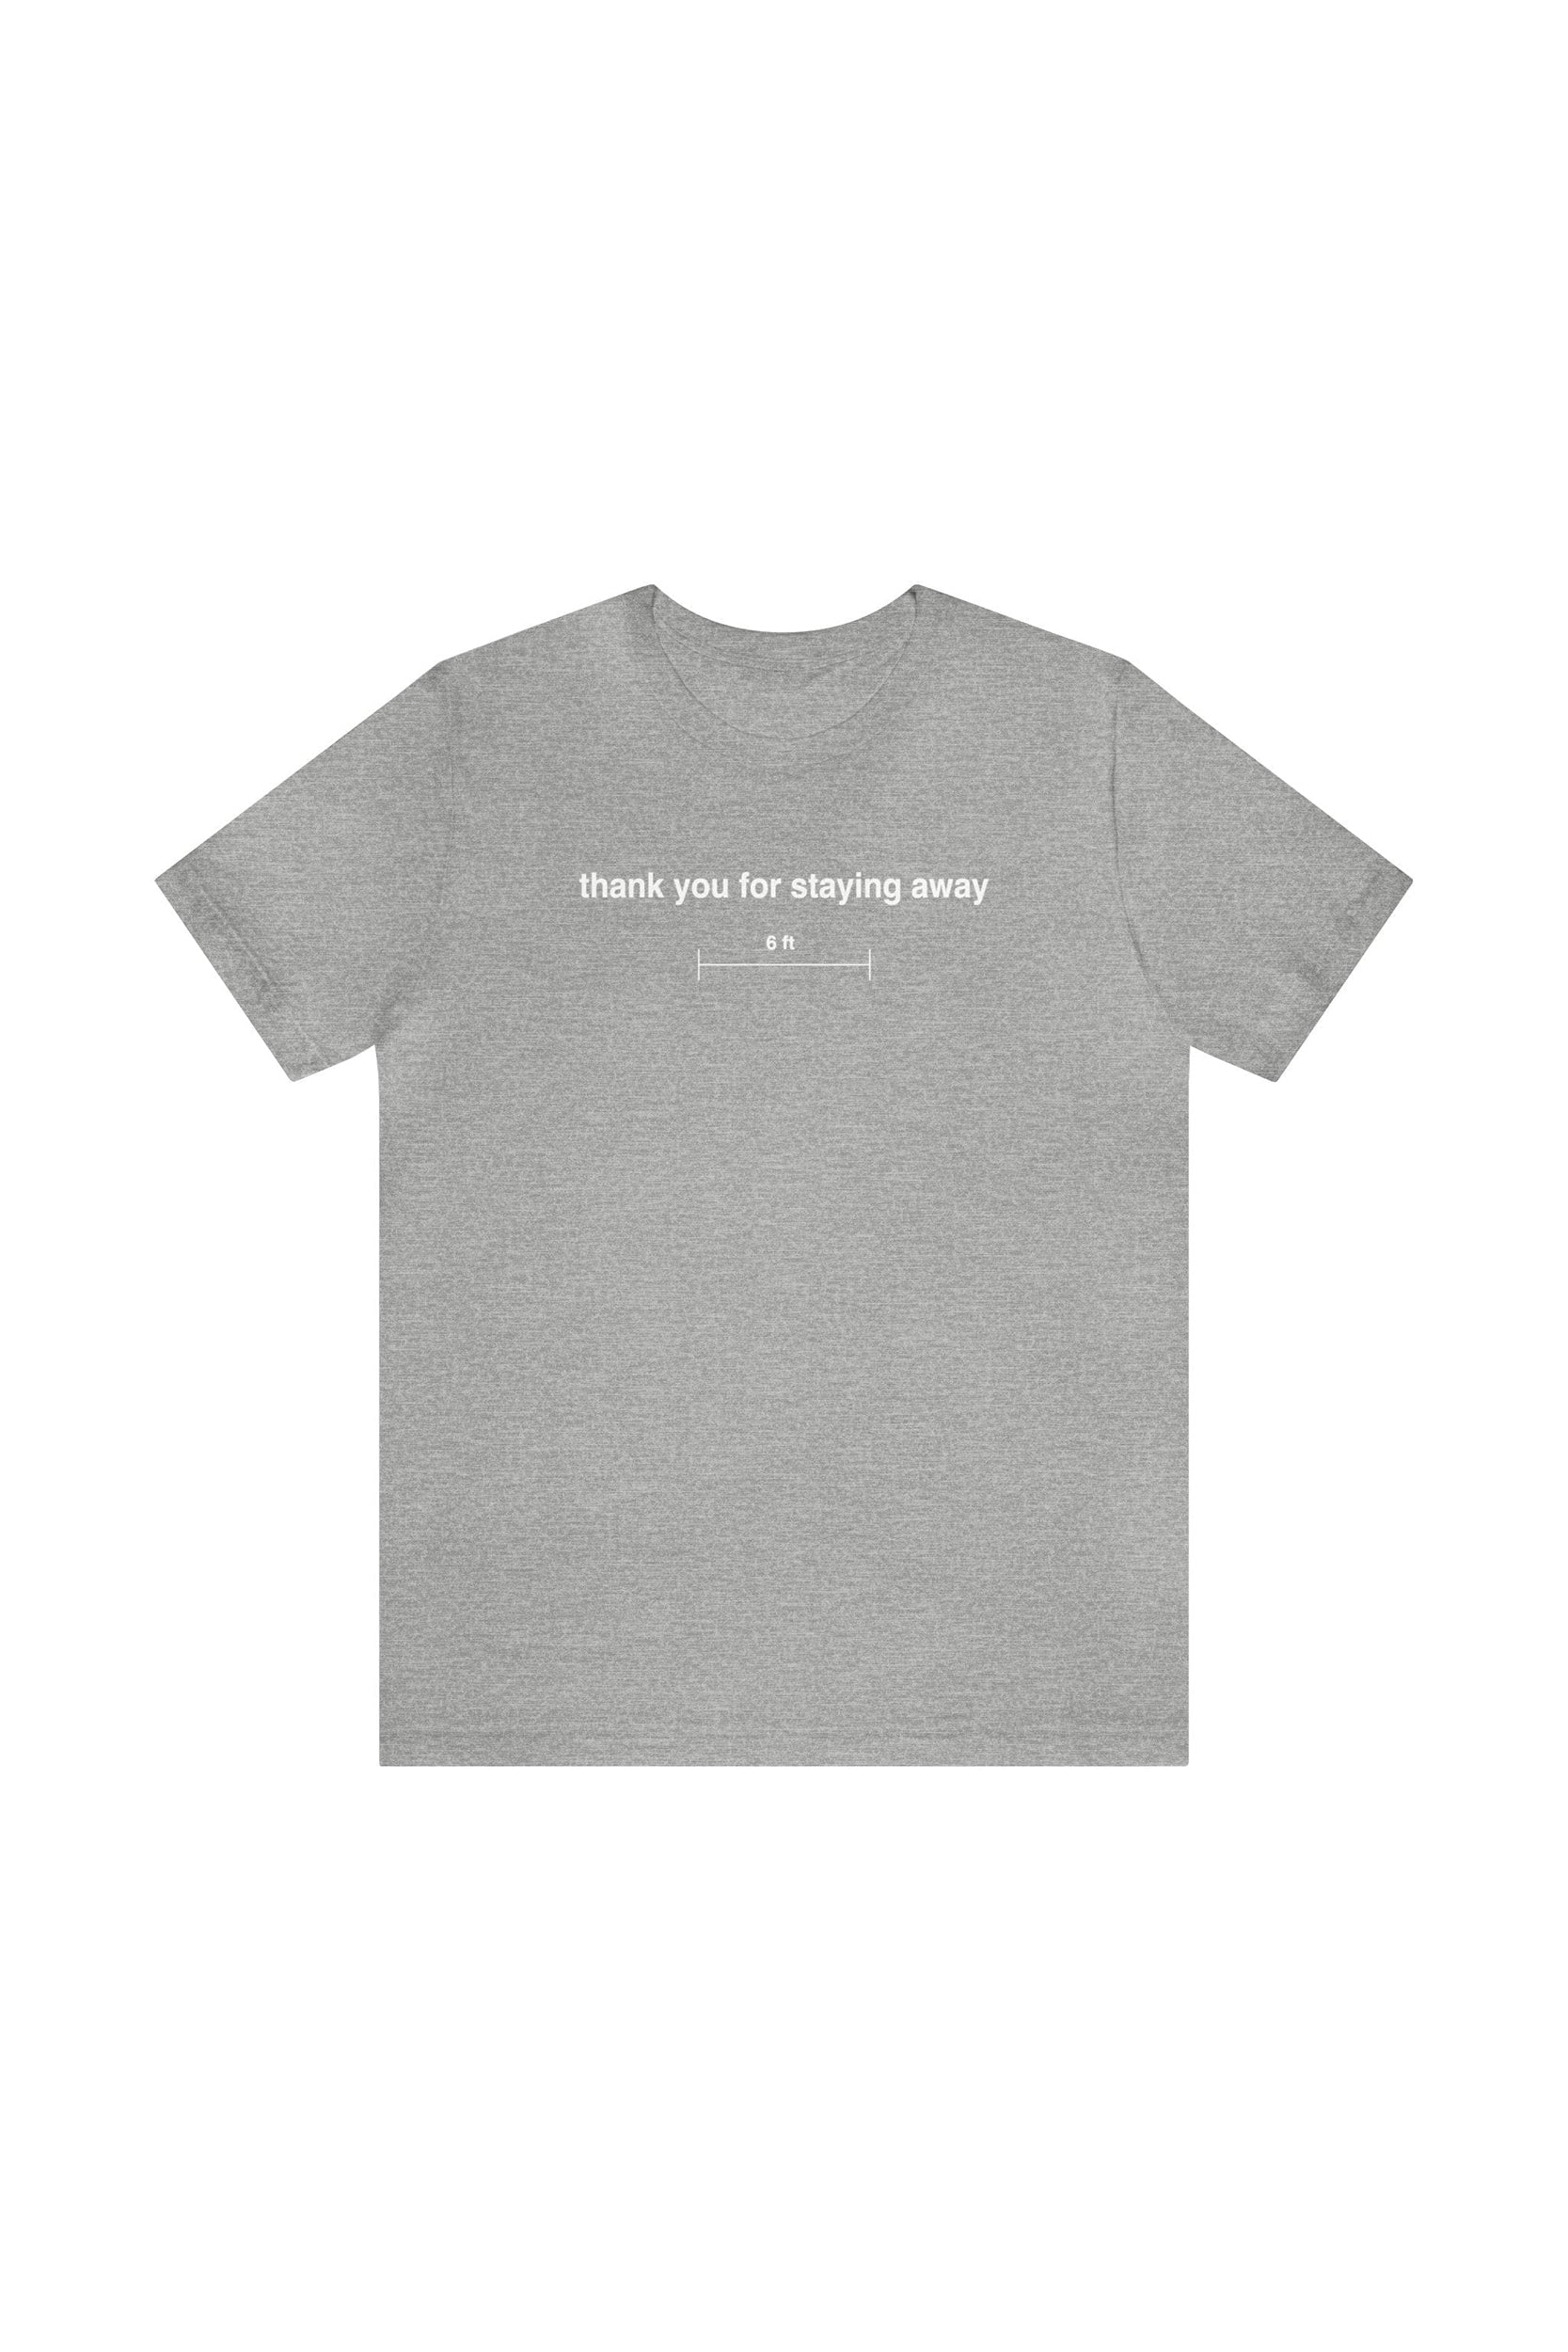 "thank you for staying away" T-Shirt